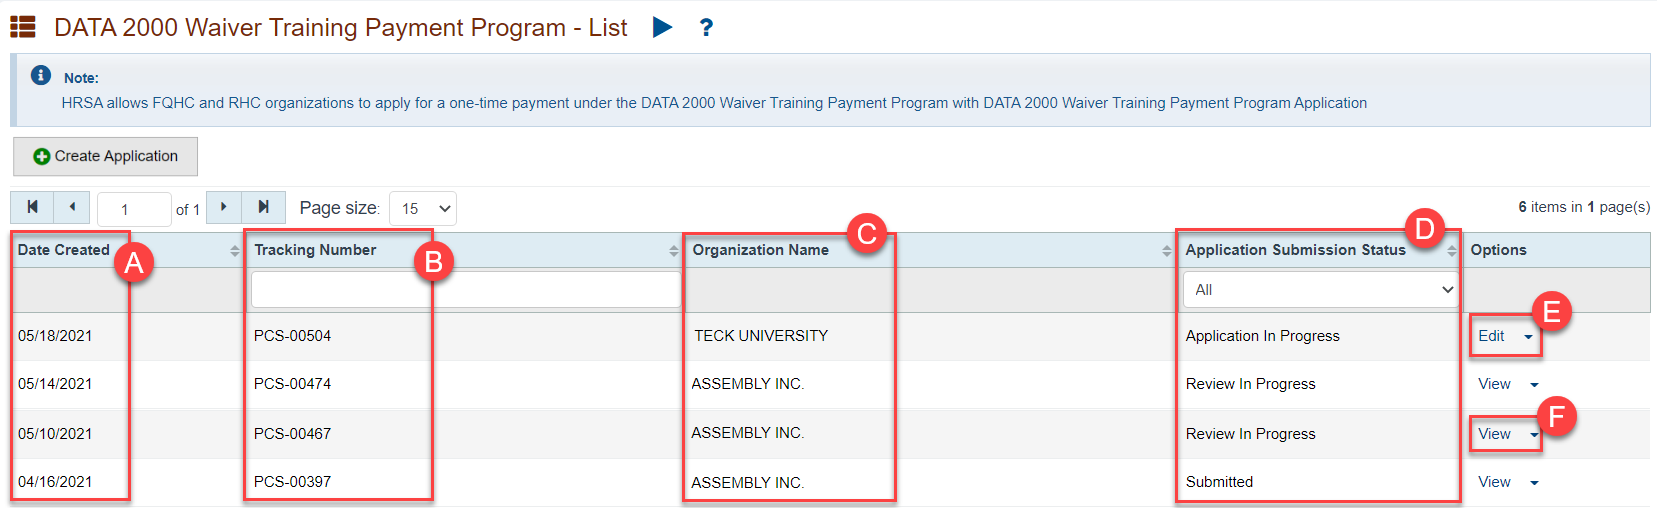 Screenshot of the Program List page showing features on the page